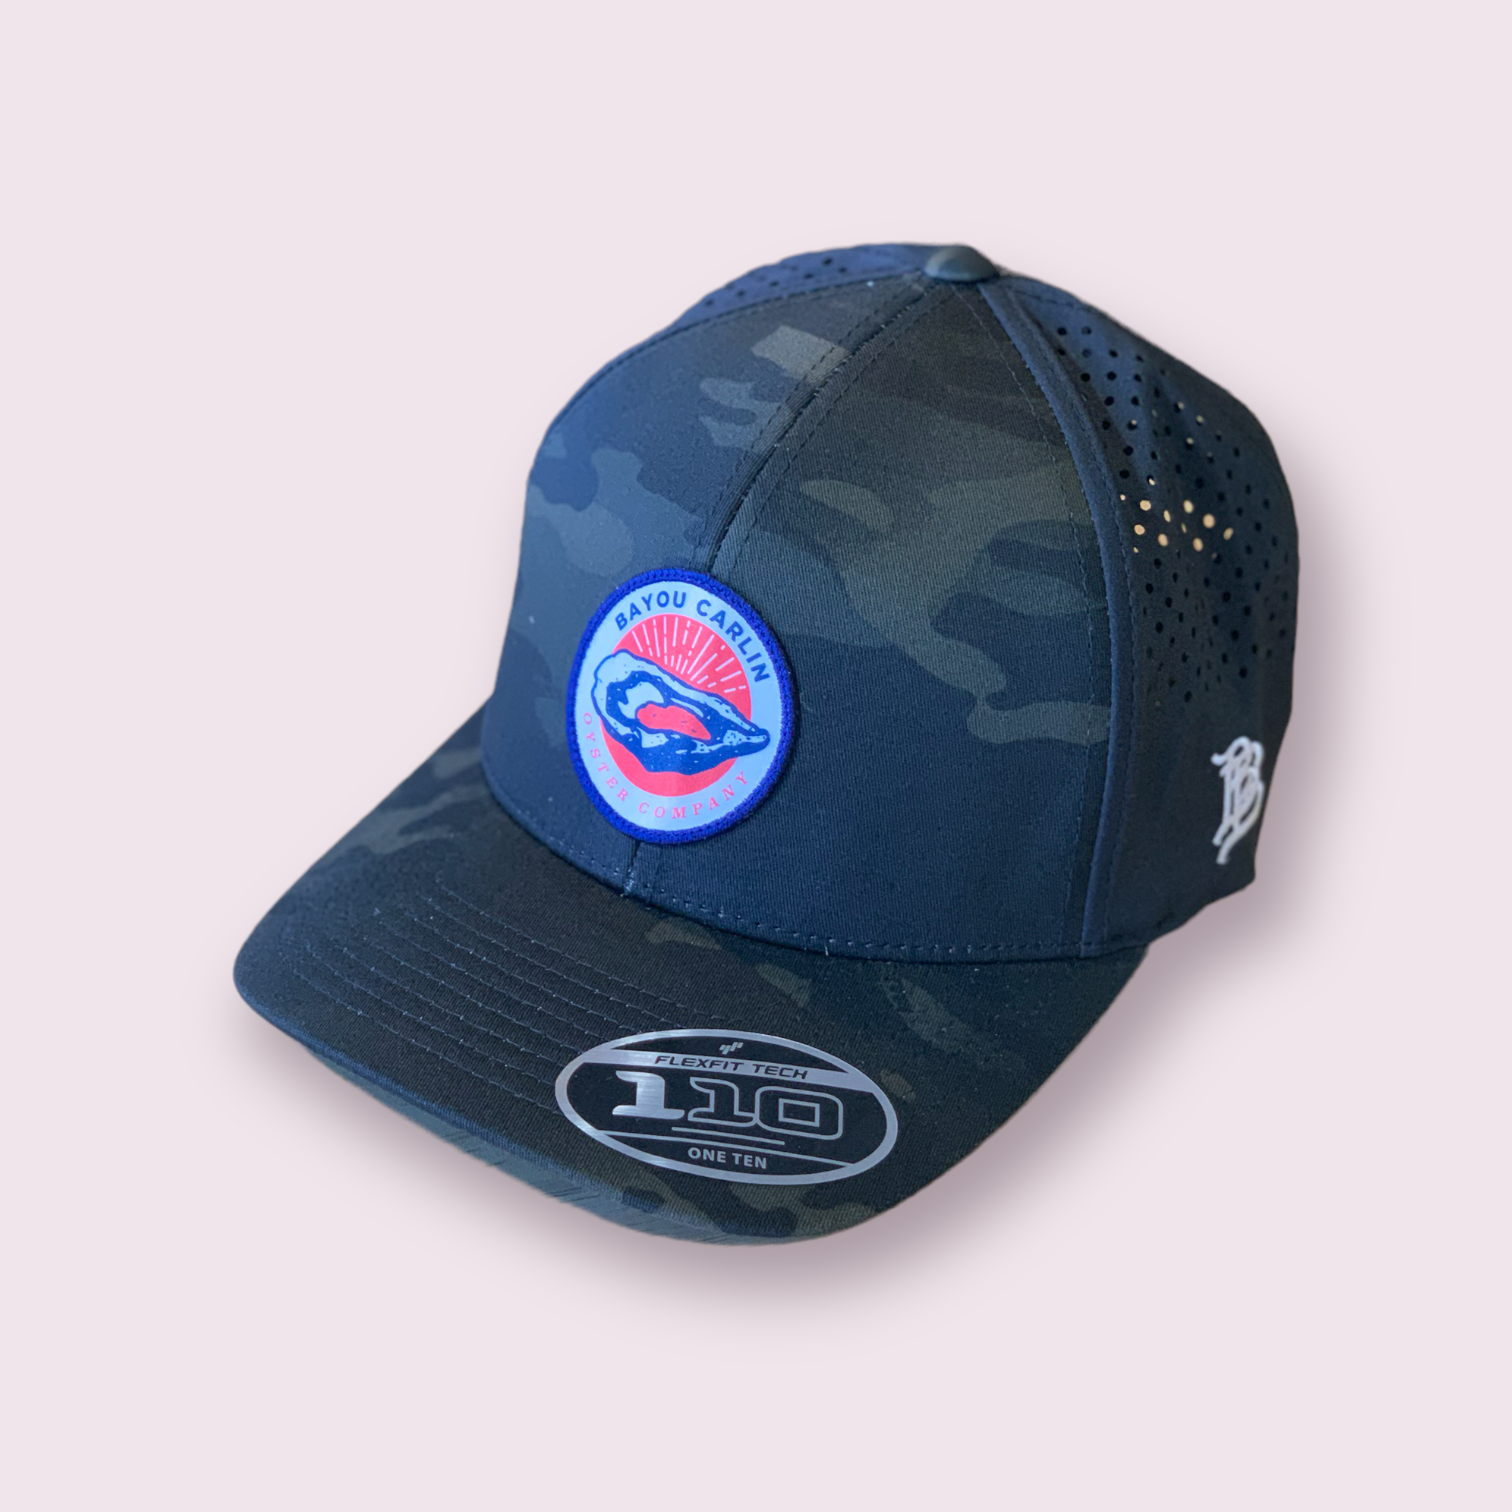 Curved Performance Trucker Hat Black Logo Patch Sublimated – MultiCa - Carlin Oyster - Bayou